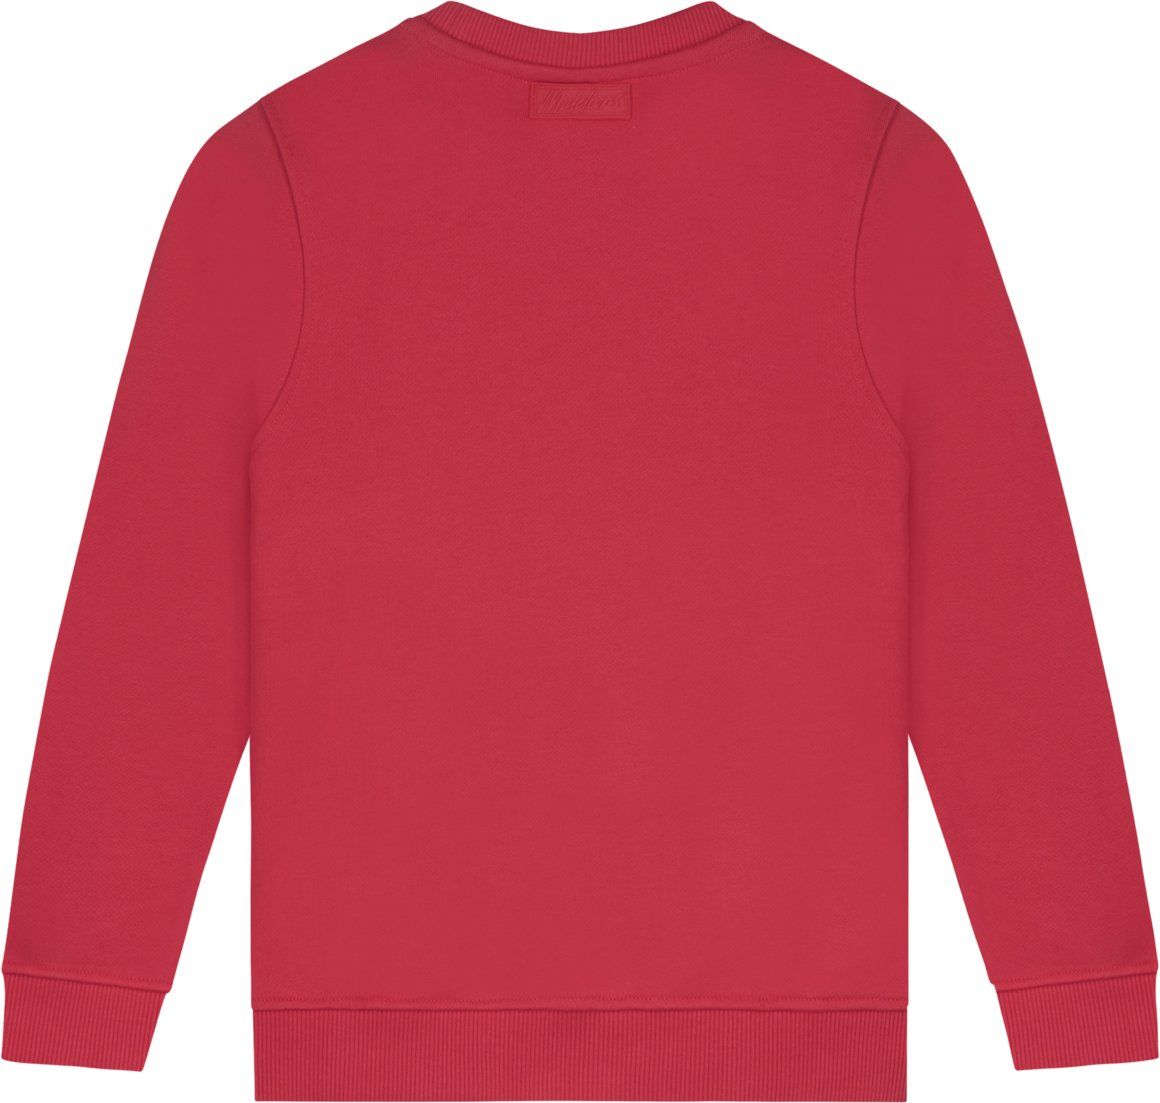 Malelions Junior Jimmy Crewneck - Red Rood